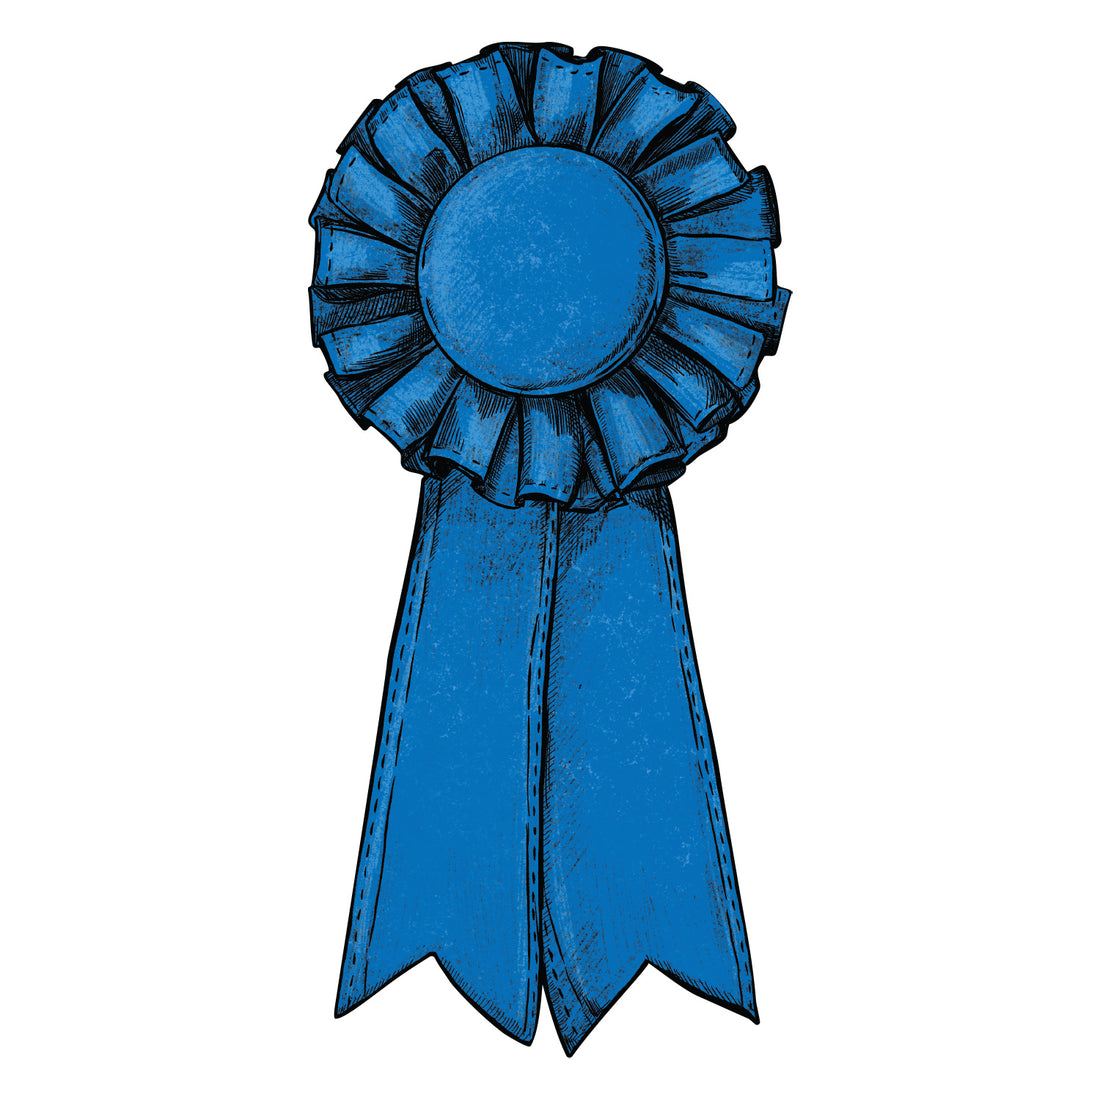 A die-cut illustration of a blue ribbon award with black outlines and details, featuring a ruffled circle on top and two long tails trailing below.